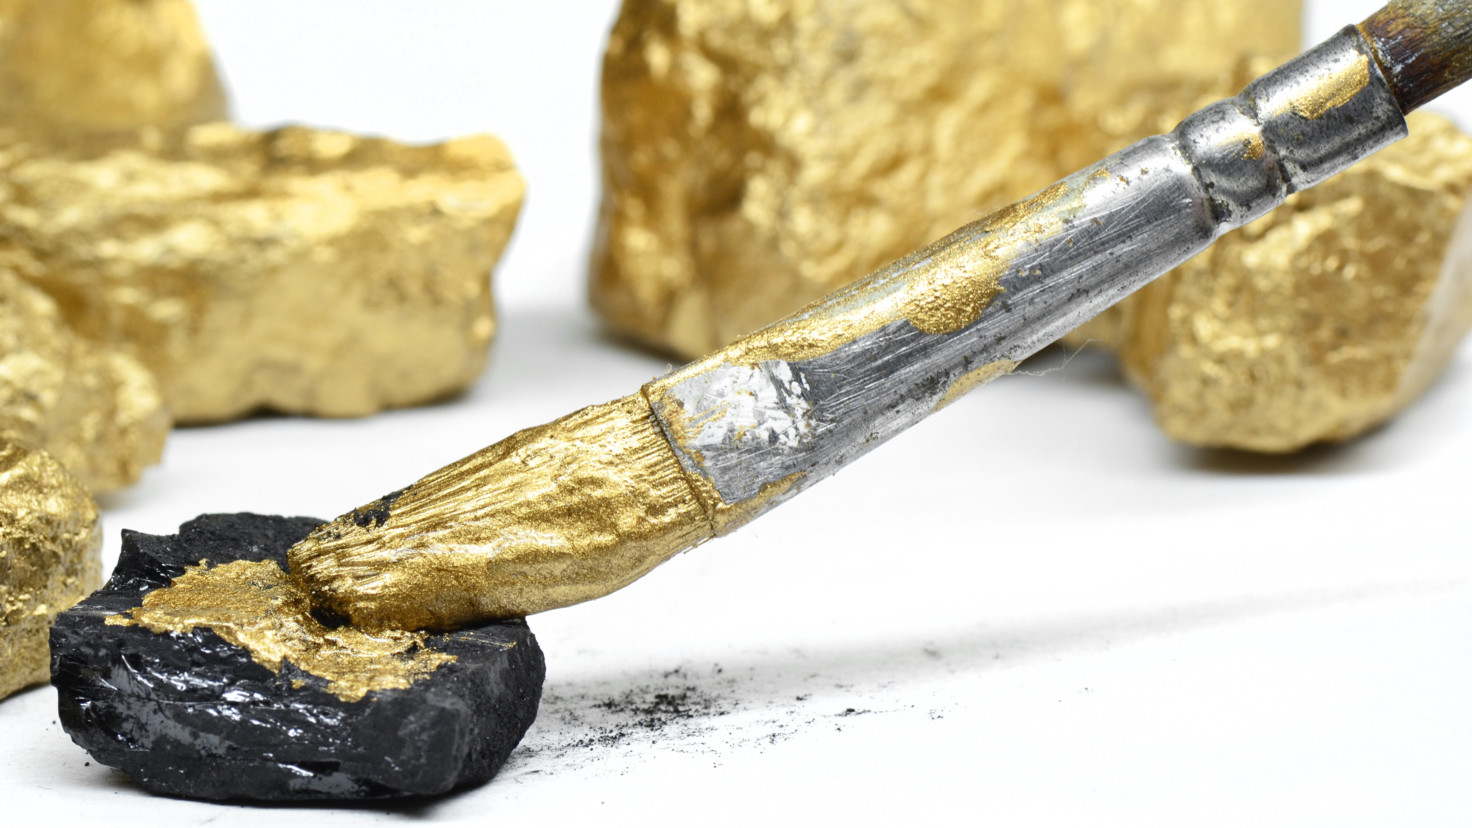 Fake gold paint being applied to black rocks